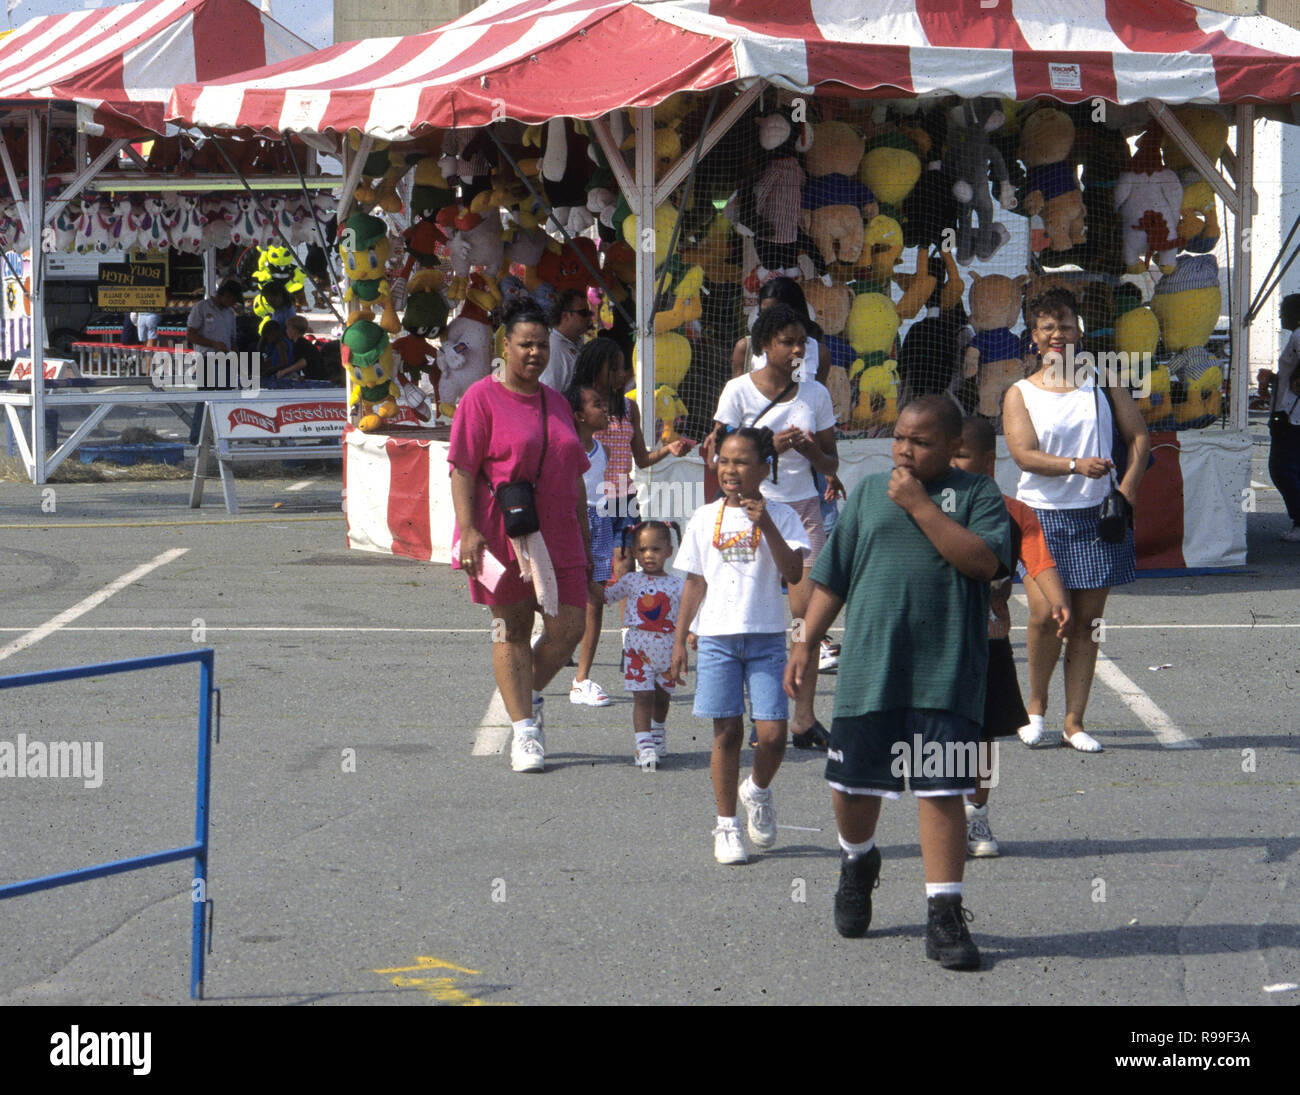 family at a carnival Stock Photo